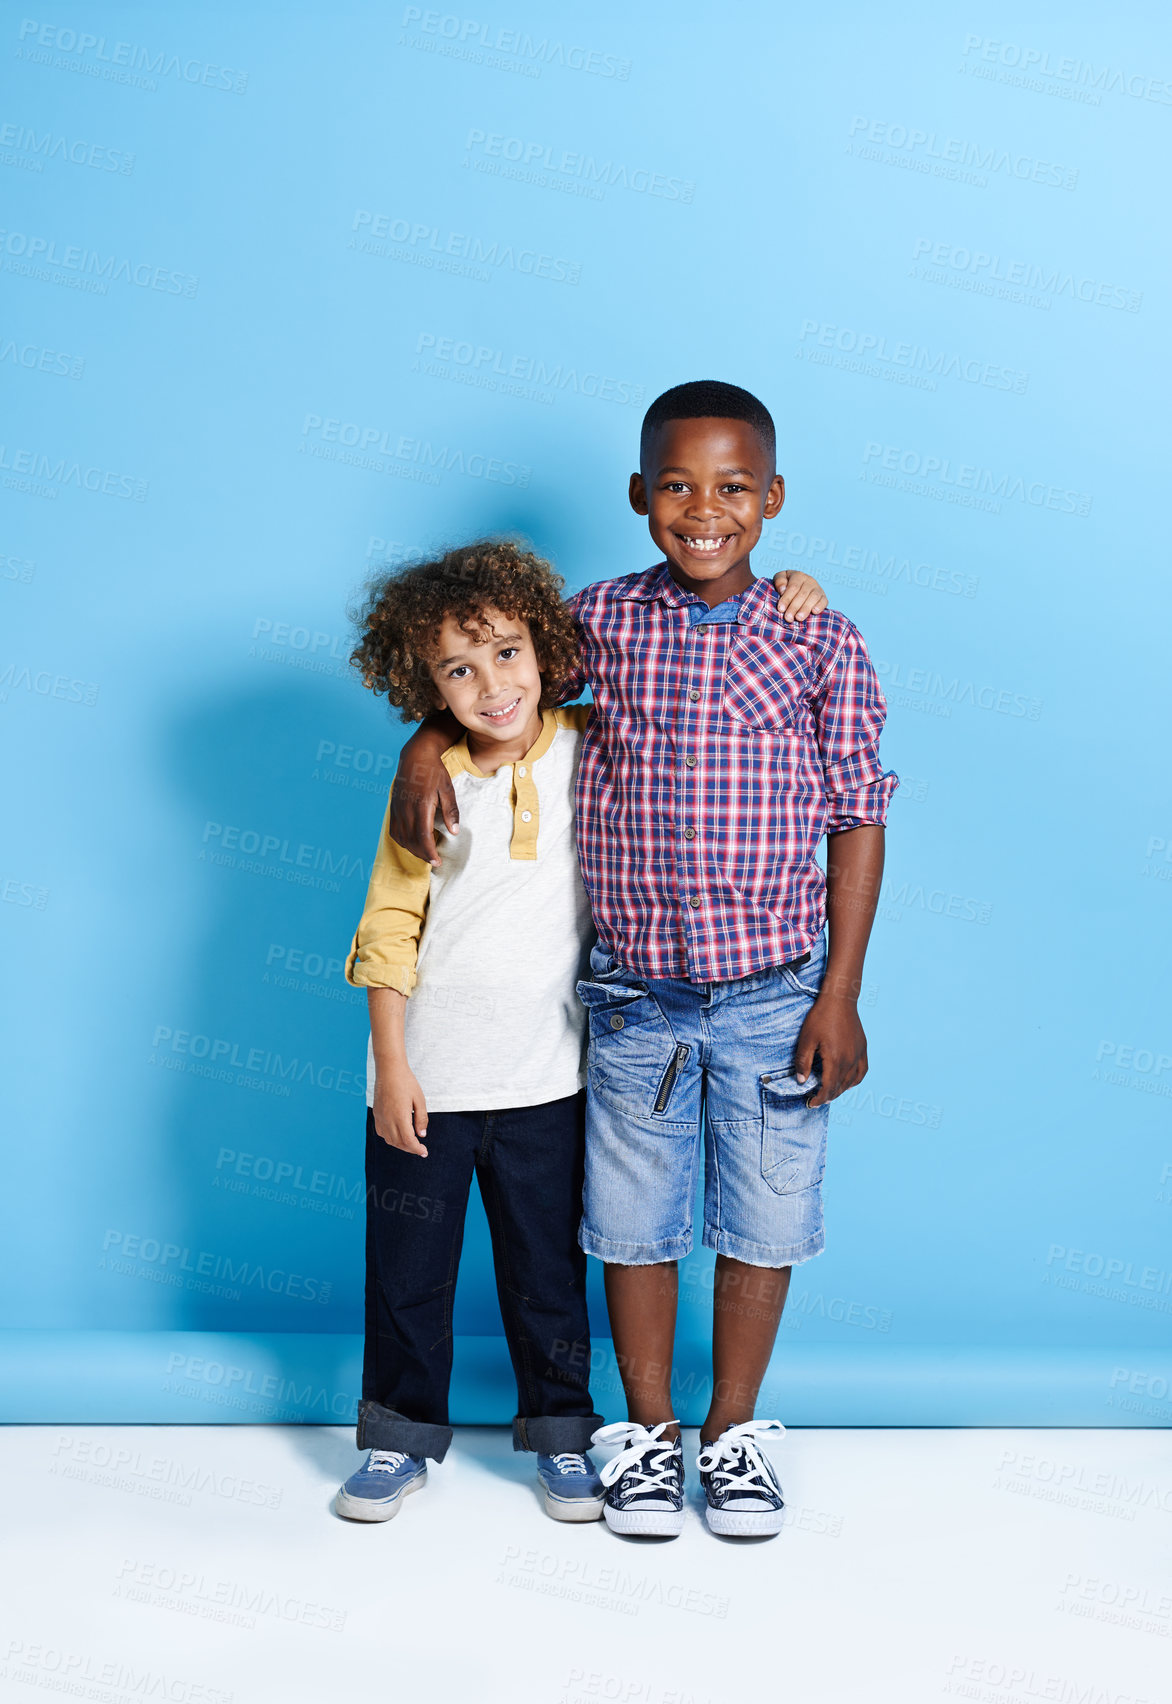 Buy stock photo Shot of two young boys smiling at the camera